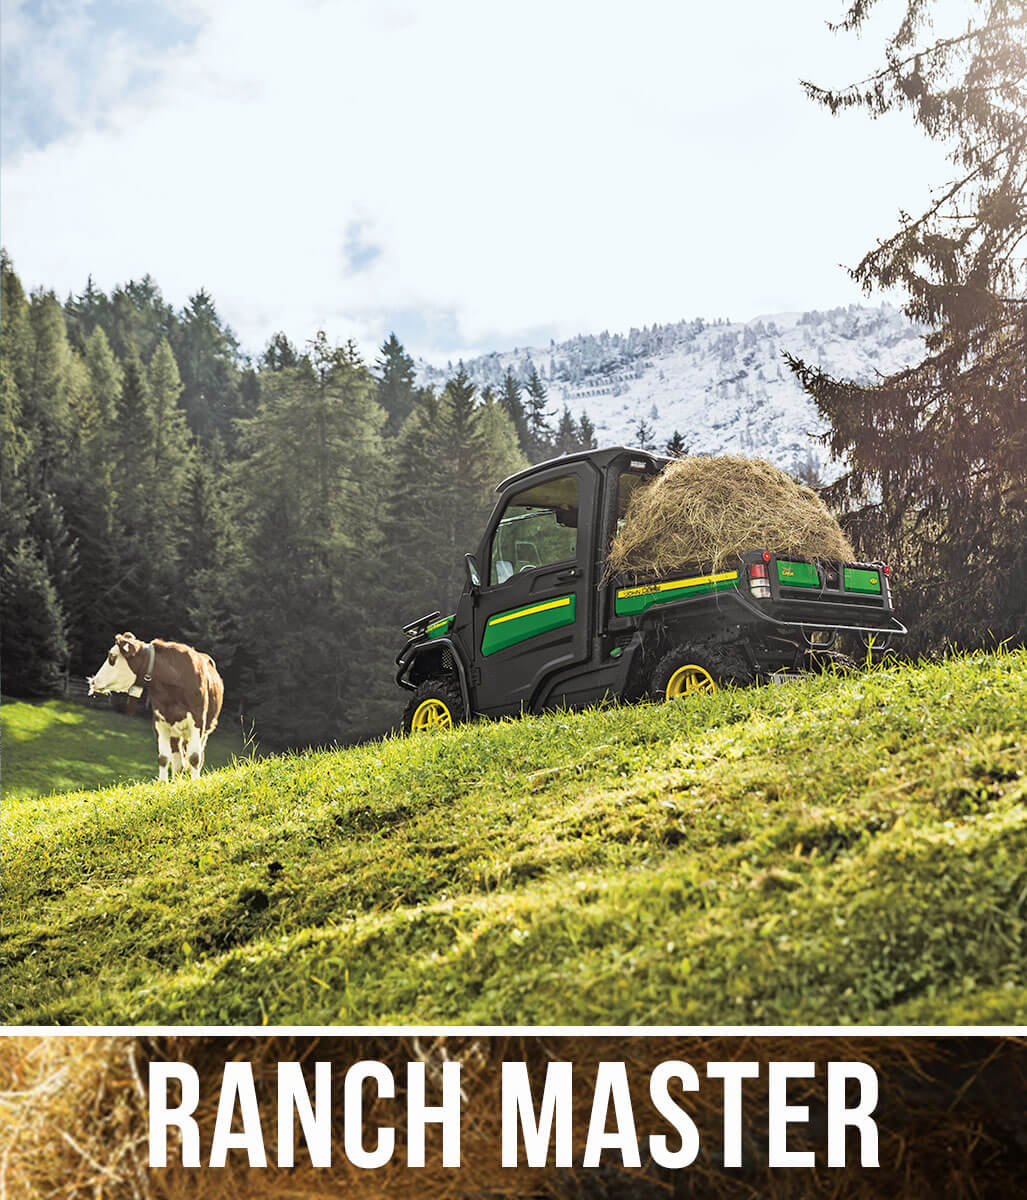 The Ranch Master Package